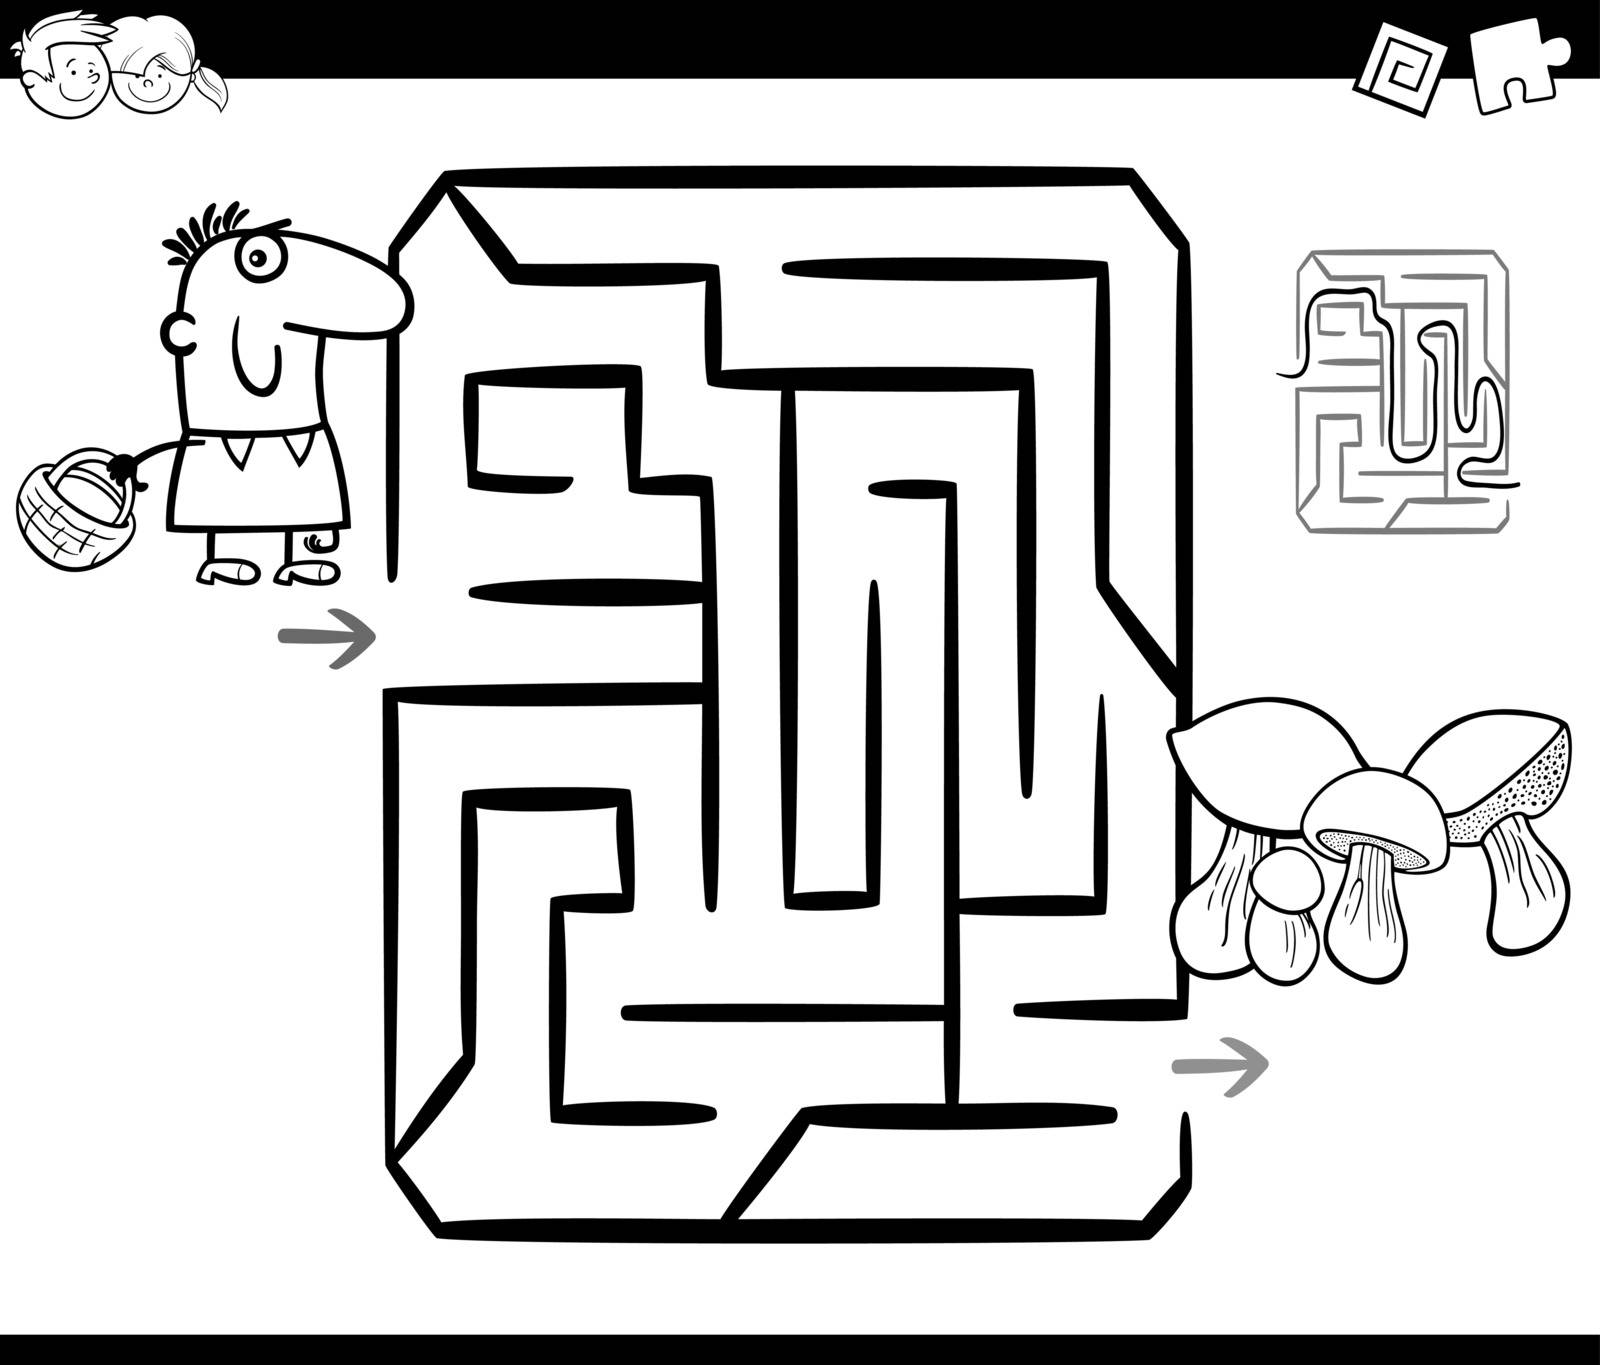 Black and White Cartoon Illustration of Education Maze or Labyrinth Game for Children with Man with Basket and Mushrooms Coloring Page